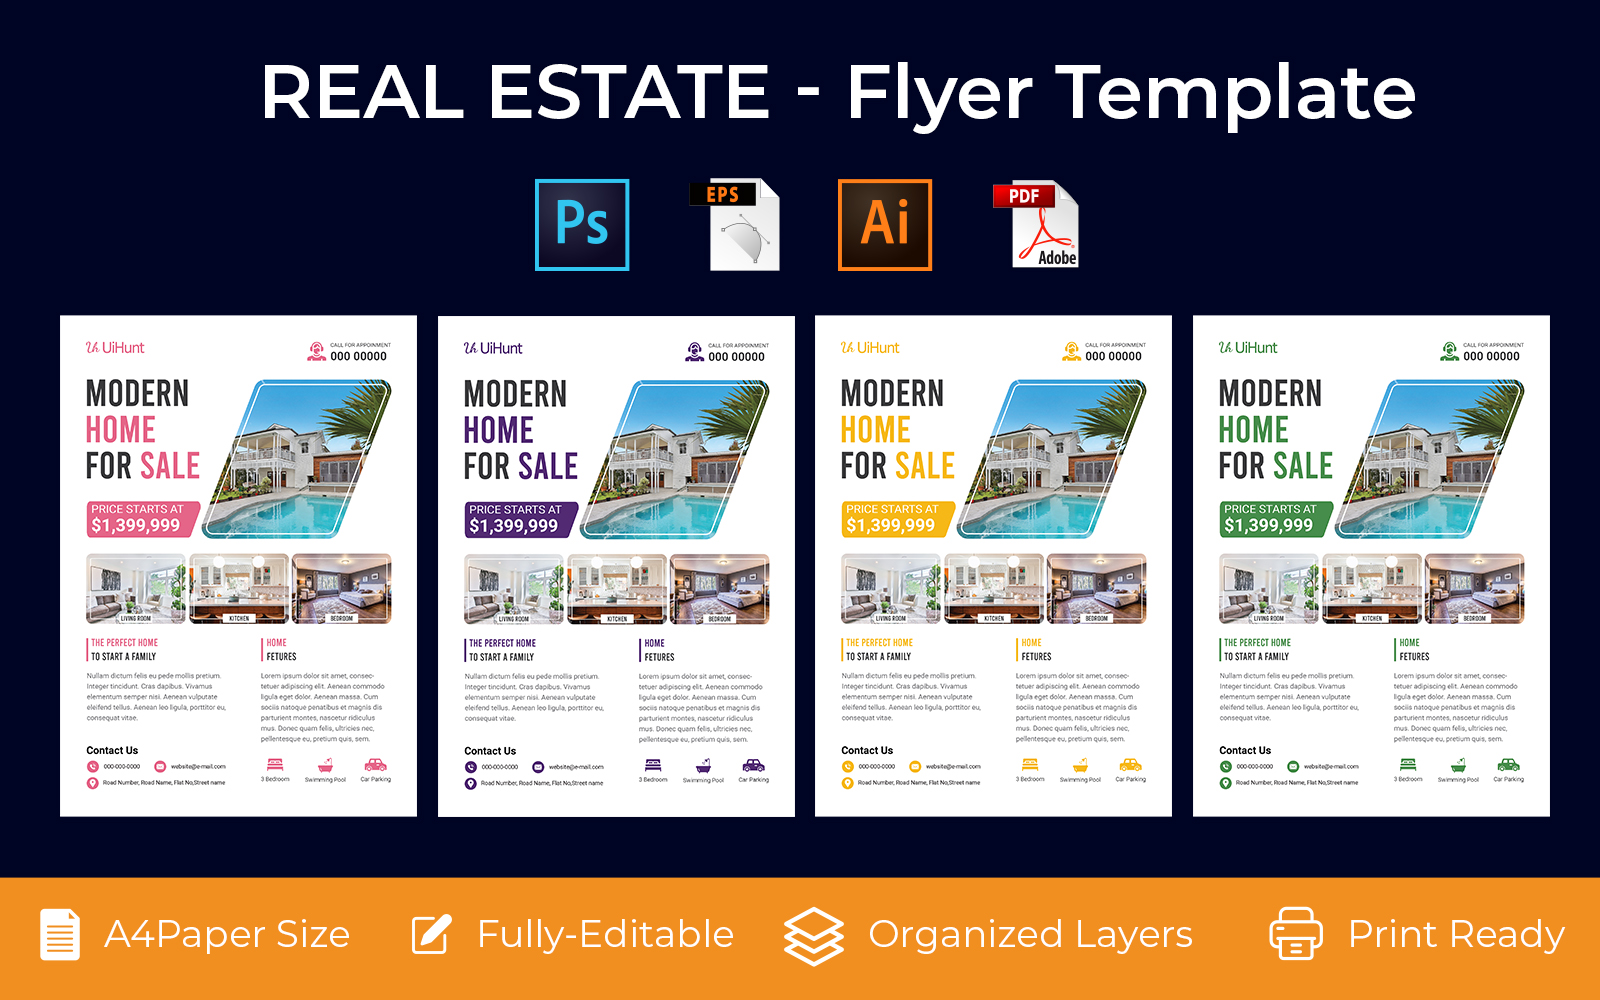 Real Estate Flyer Vol-03 - Corporate Identity Template